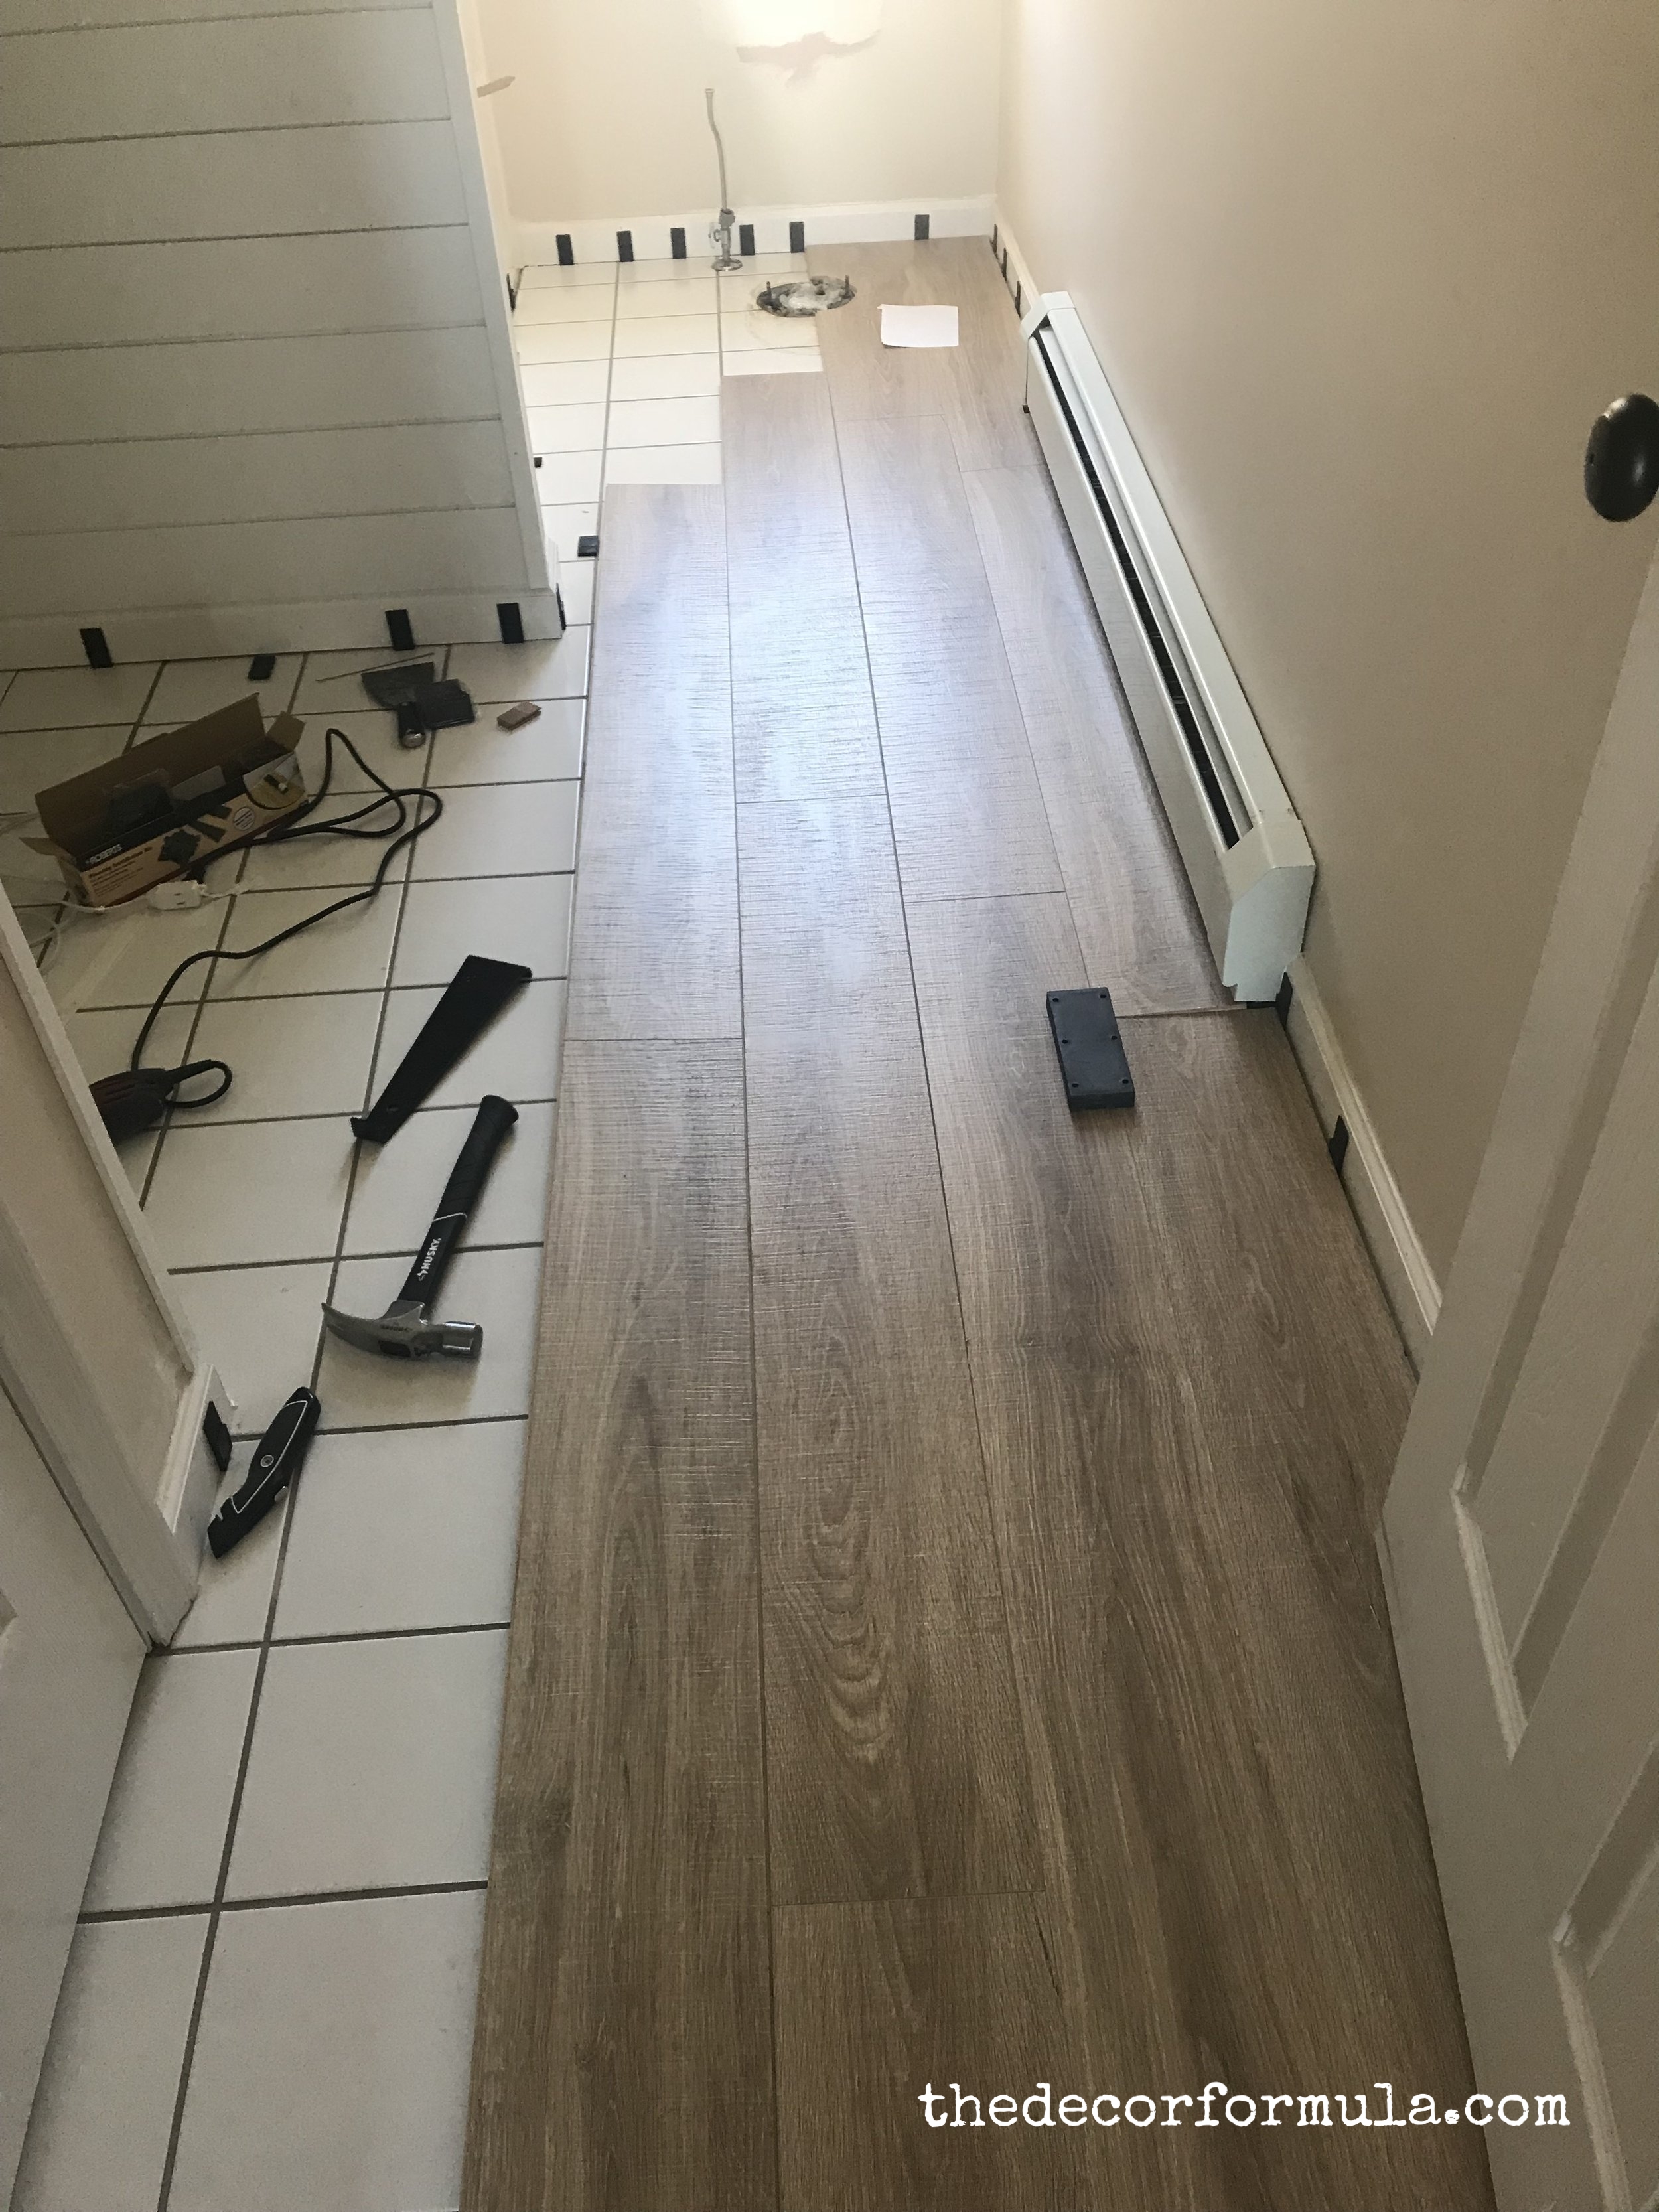 Ideas For Covering Up Tile Floors, Can Laminate Flooring Be Put Over Ceramic Tile